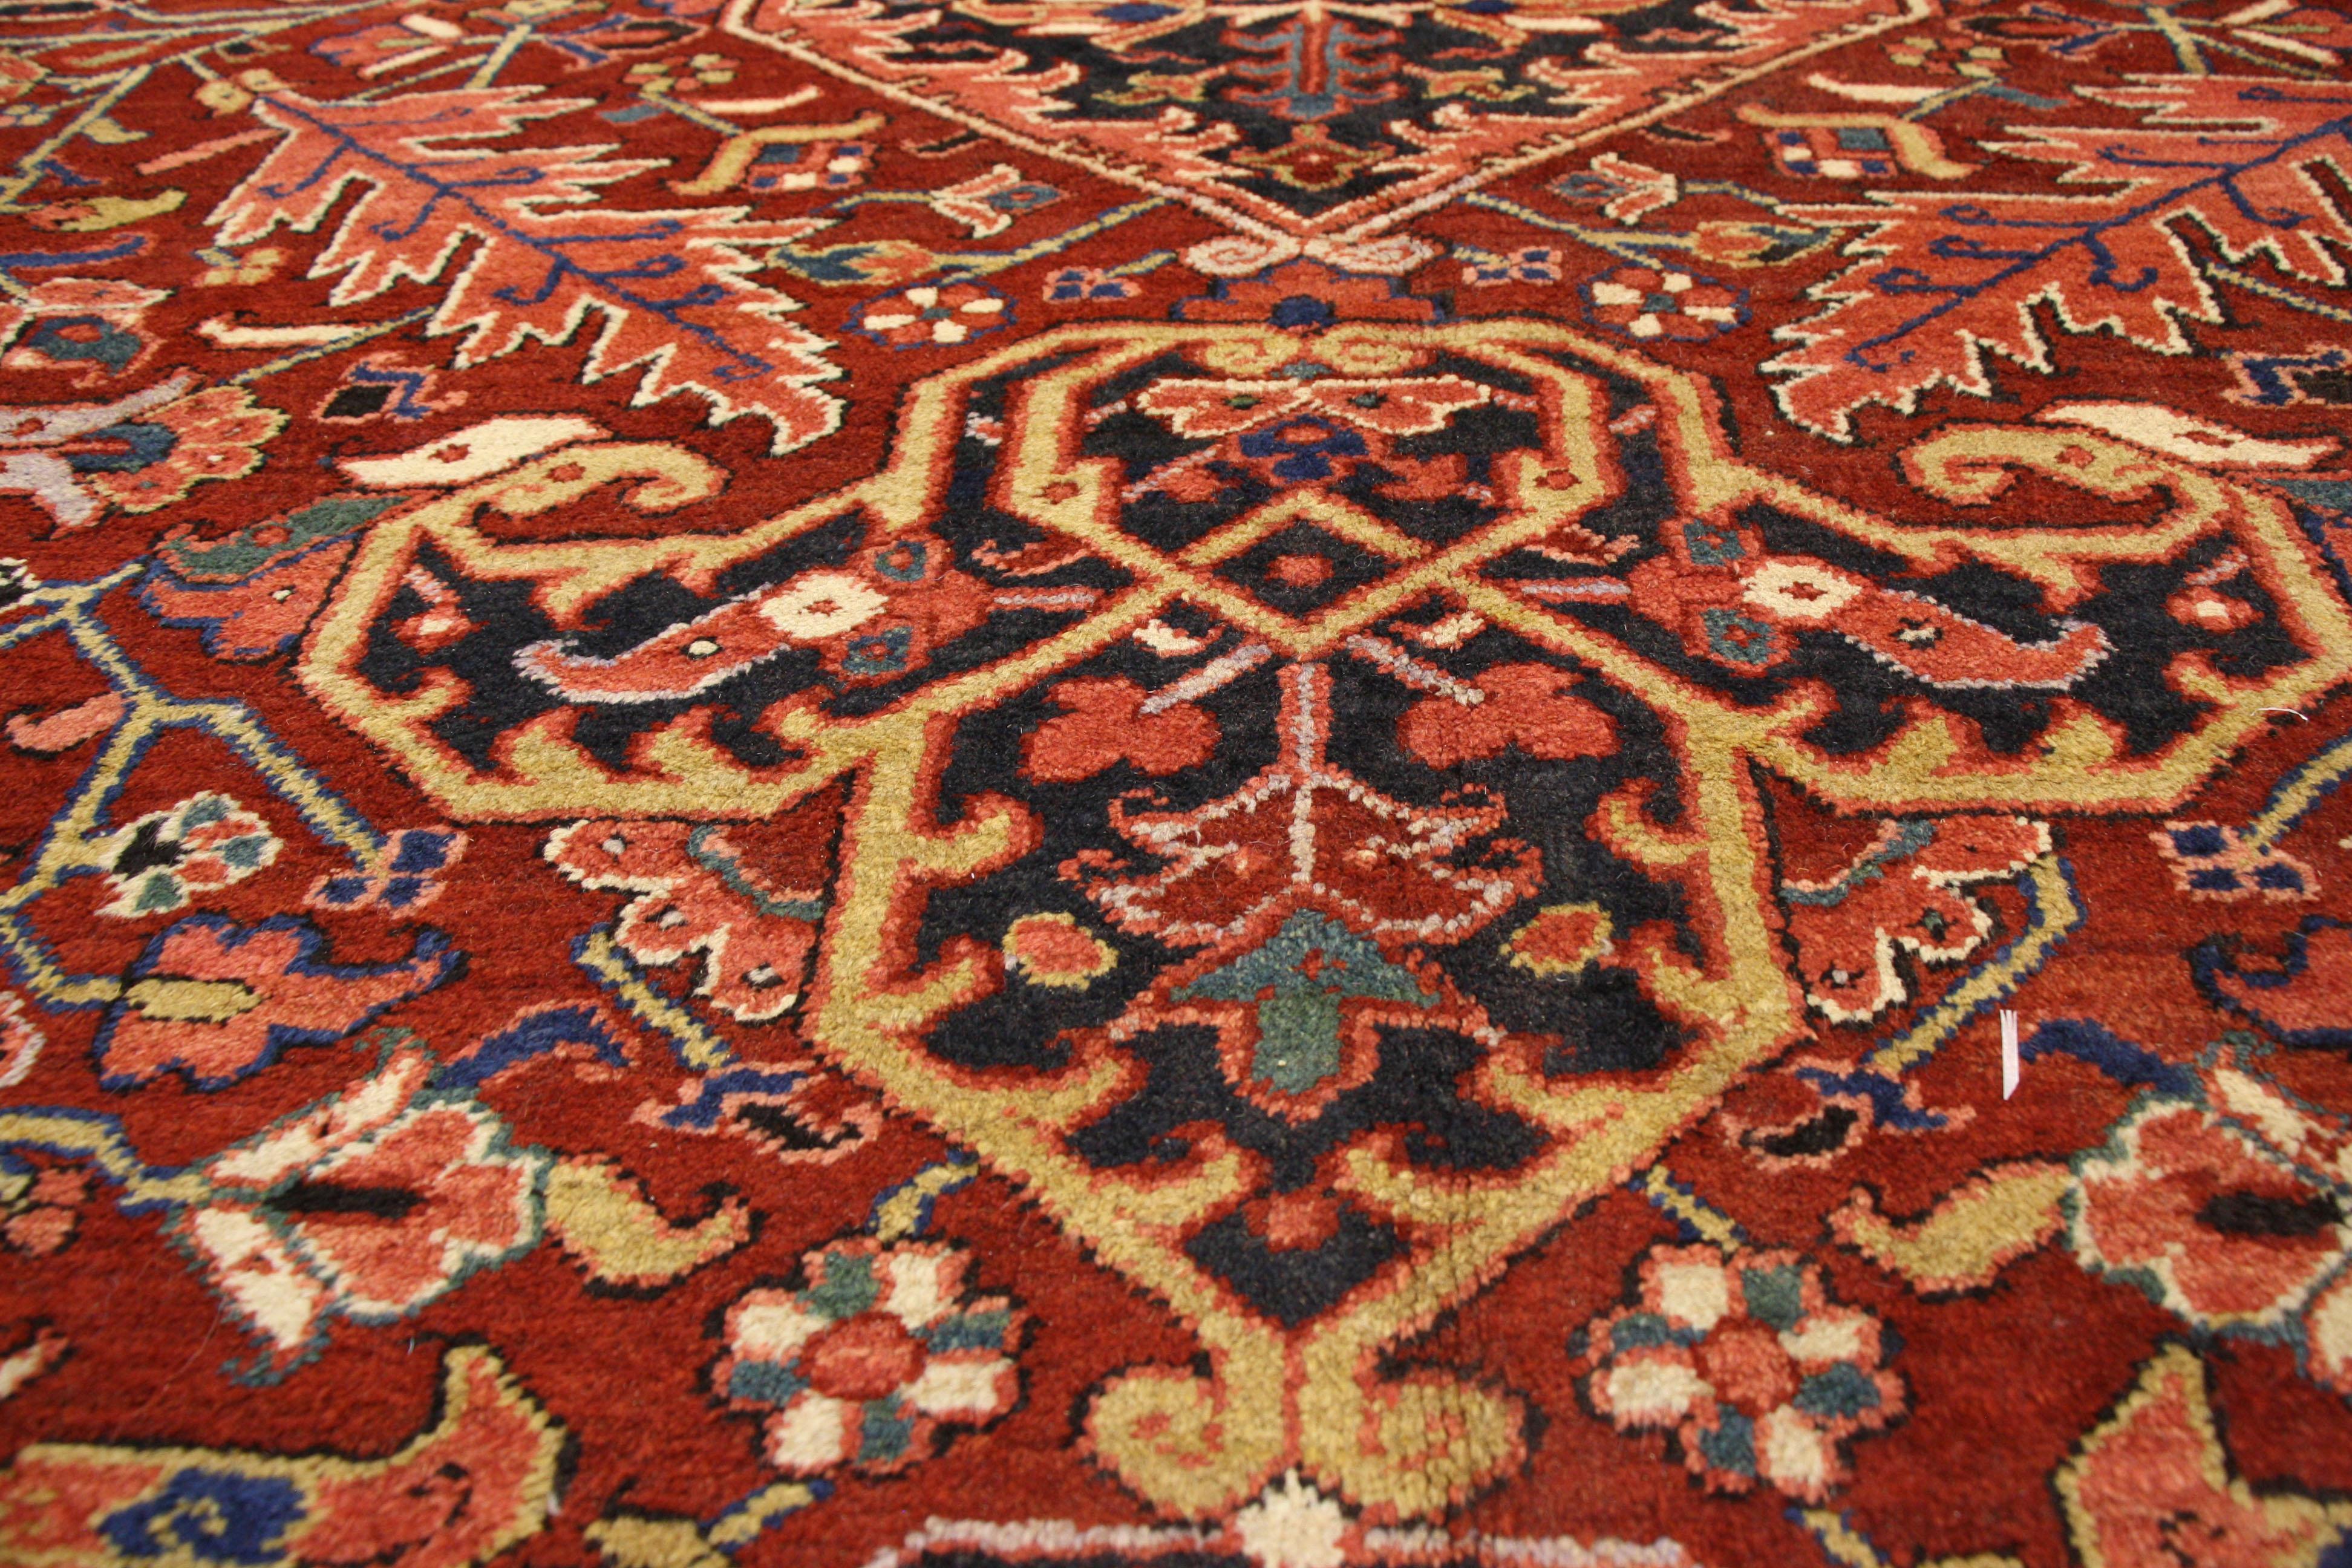 77174 Antique Heriz Persian Palace Size Rug with English Turdor Manor Style. Traditional and regal with brilliant color, this antique Persian Heriz palace size rug is comprised of a prominent central lozenge medallion flanked with two cartouche